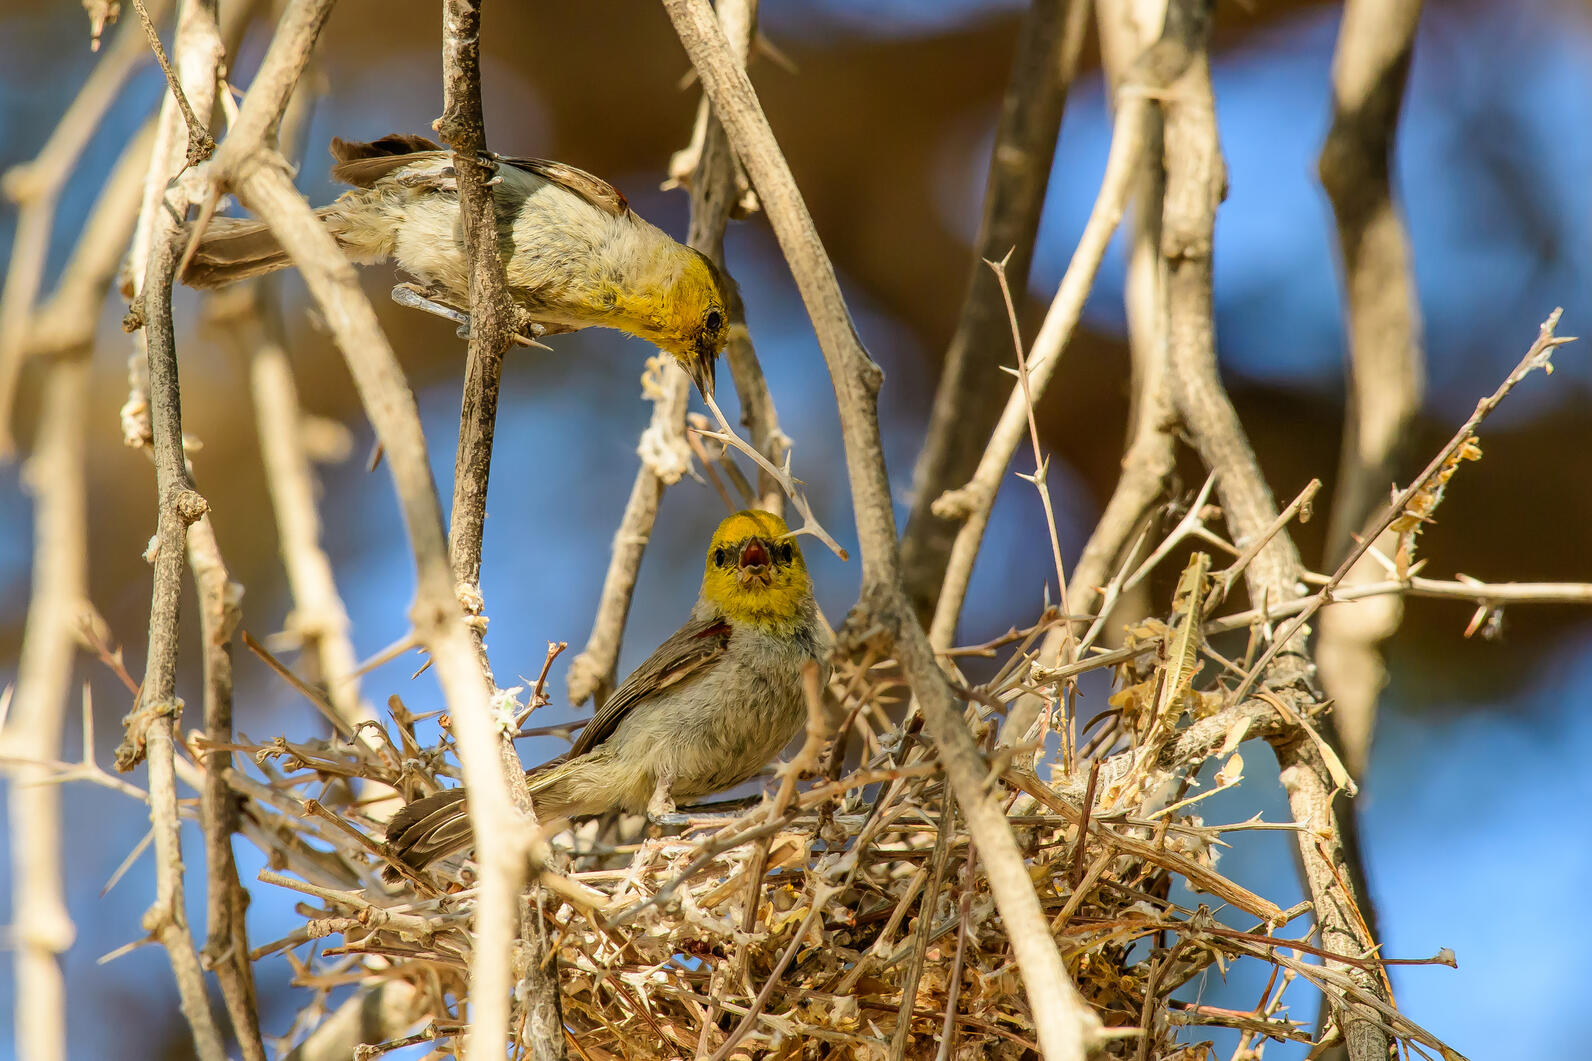 Two Verdin (little gray birds with yellow heads) work on building a nest together. One stands in the half-made nest while the other perches above it with a twig in its mouth.